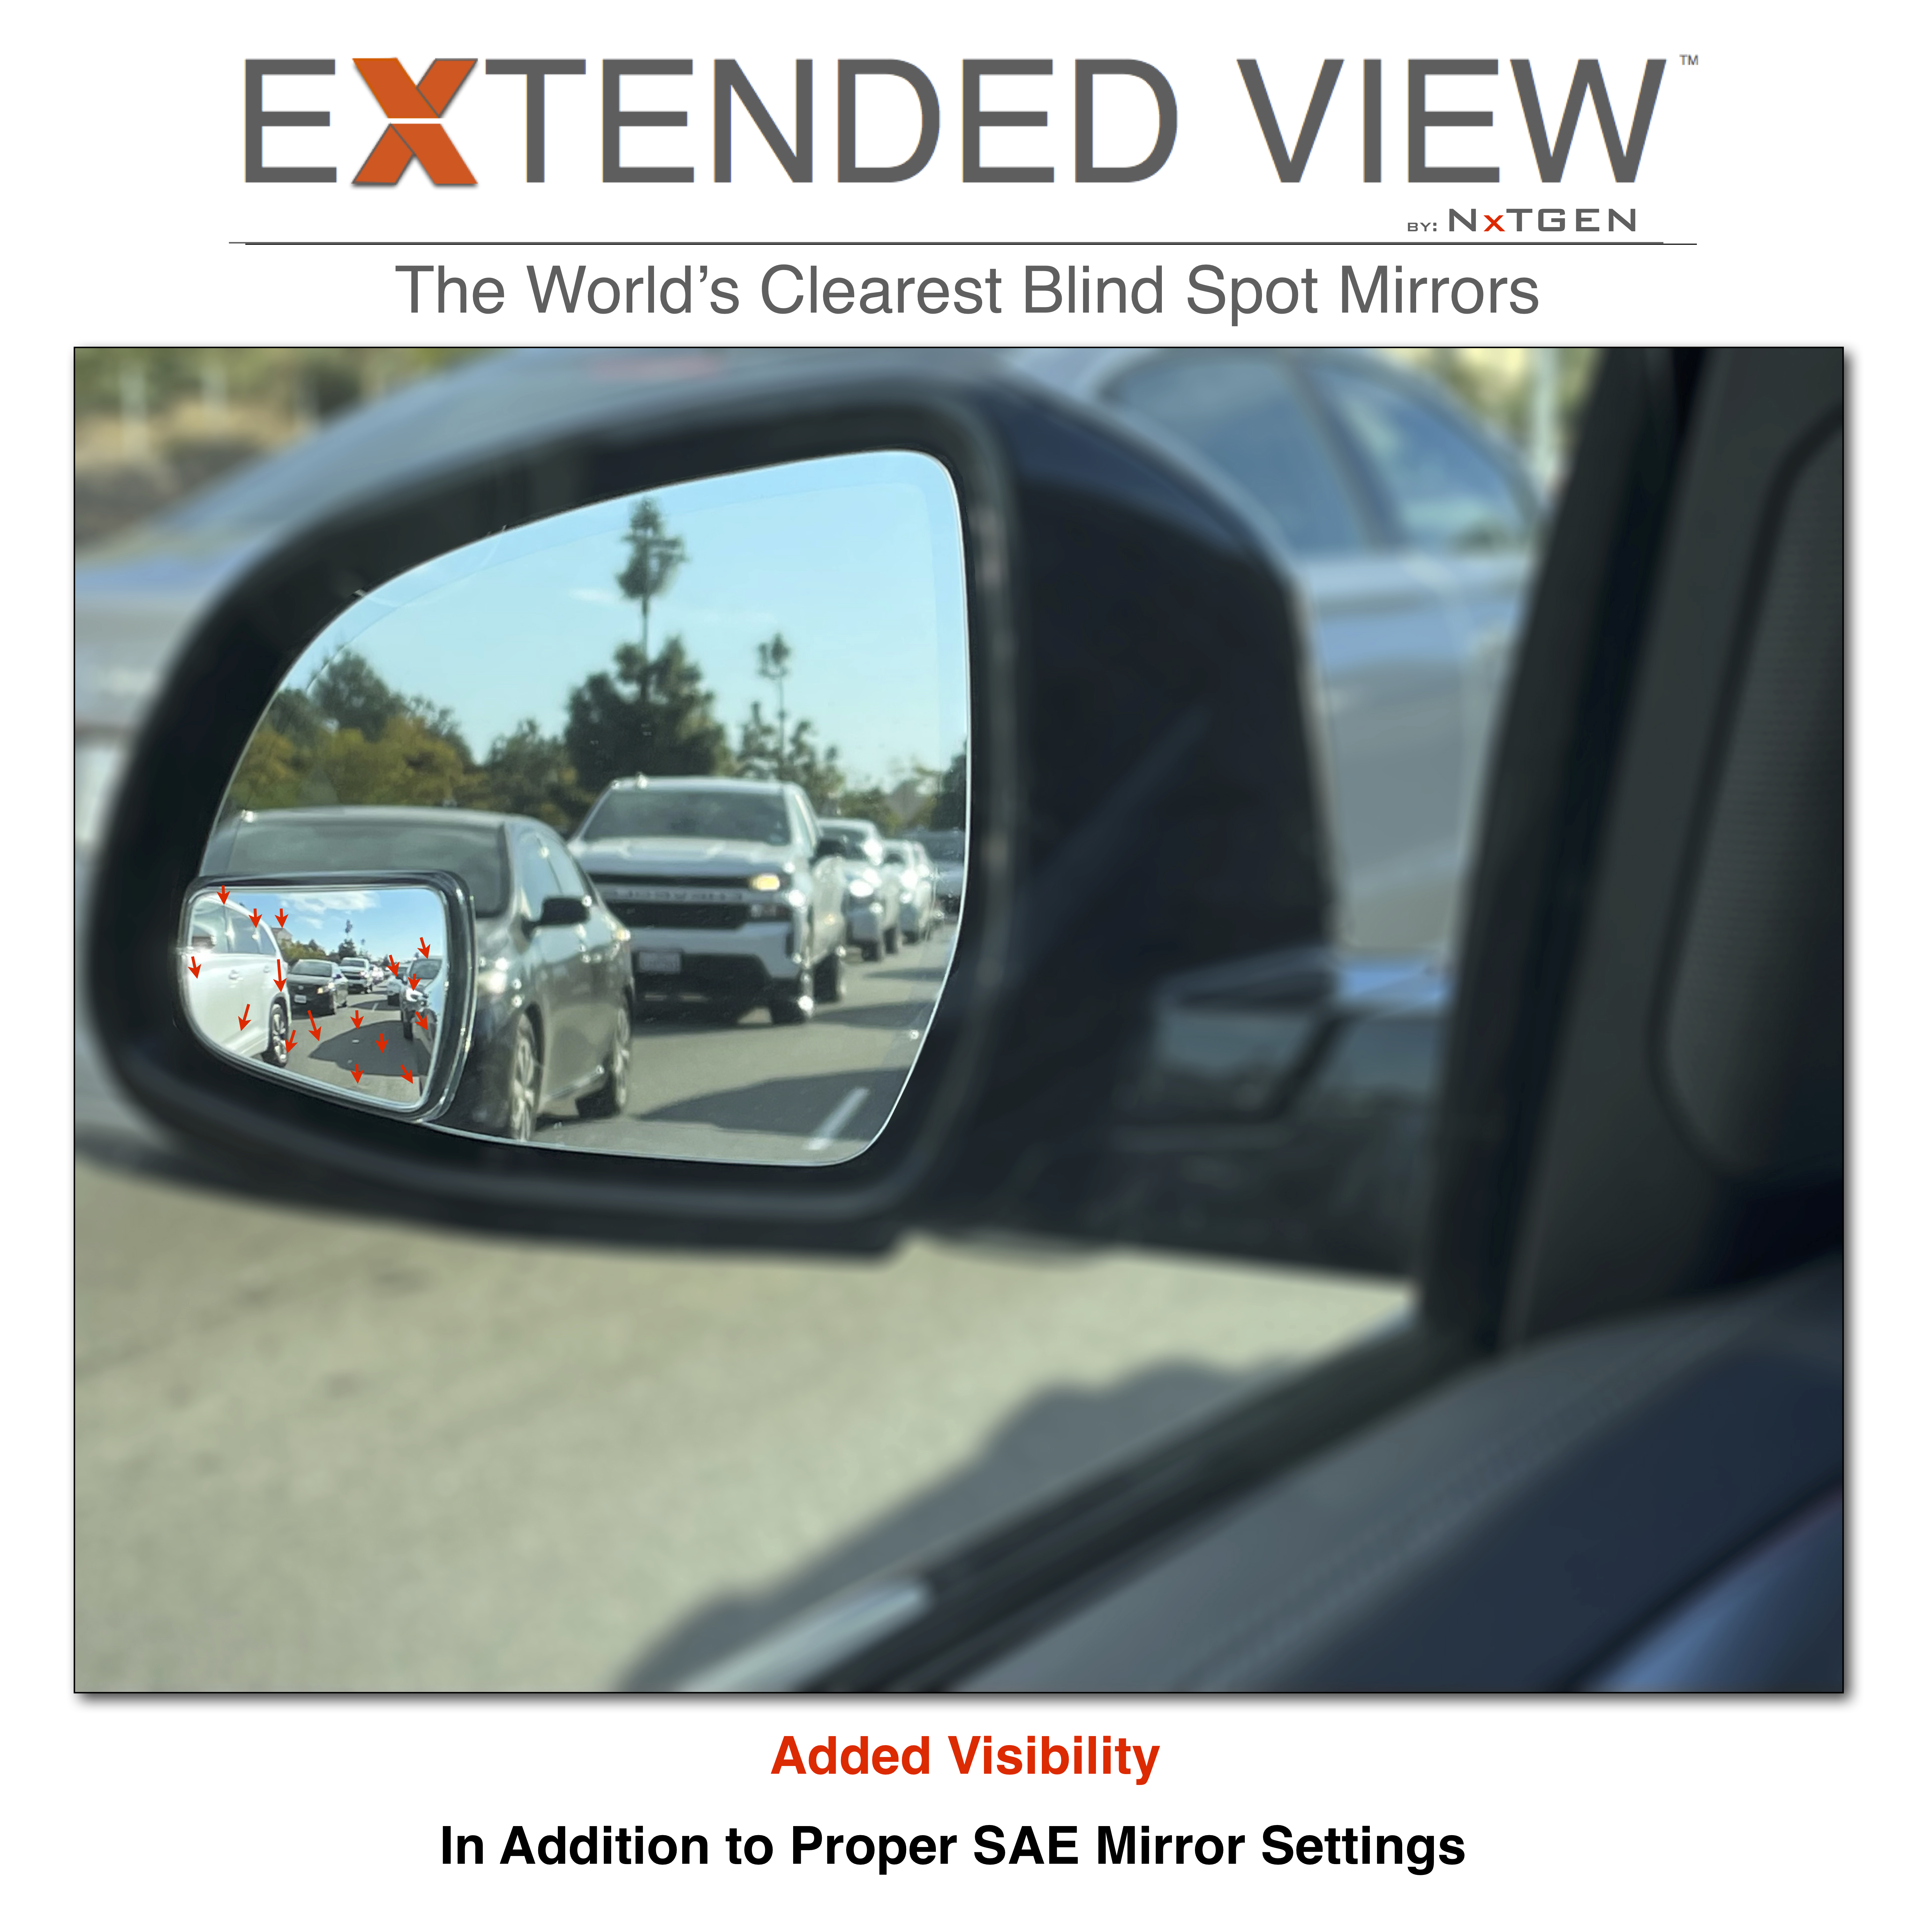 BMW X5 Blind Spot Mirrors | Extended View™